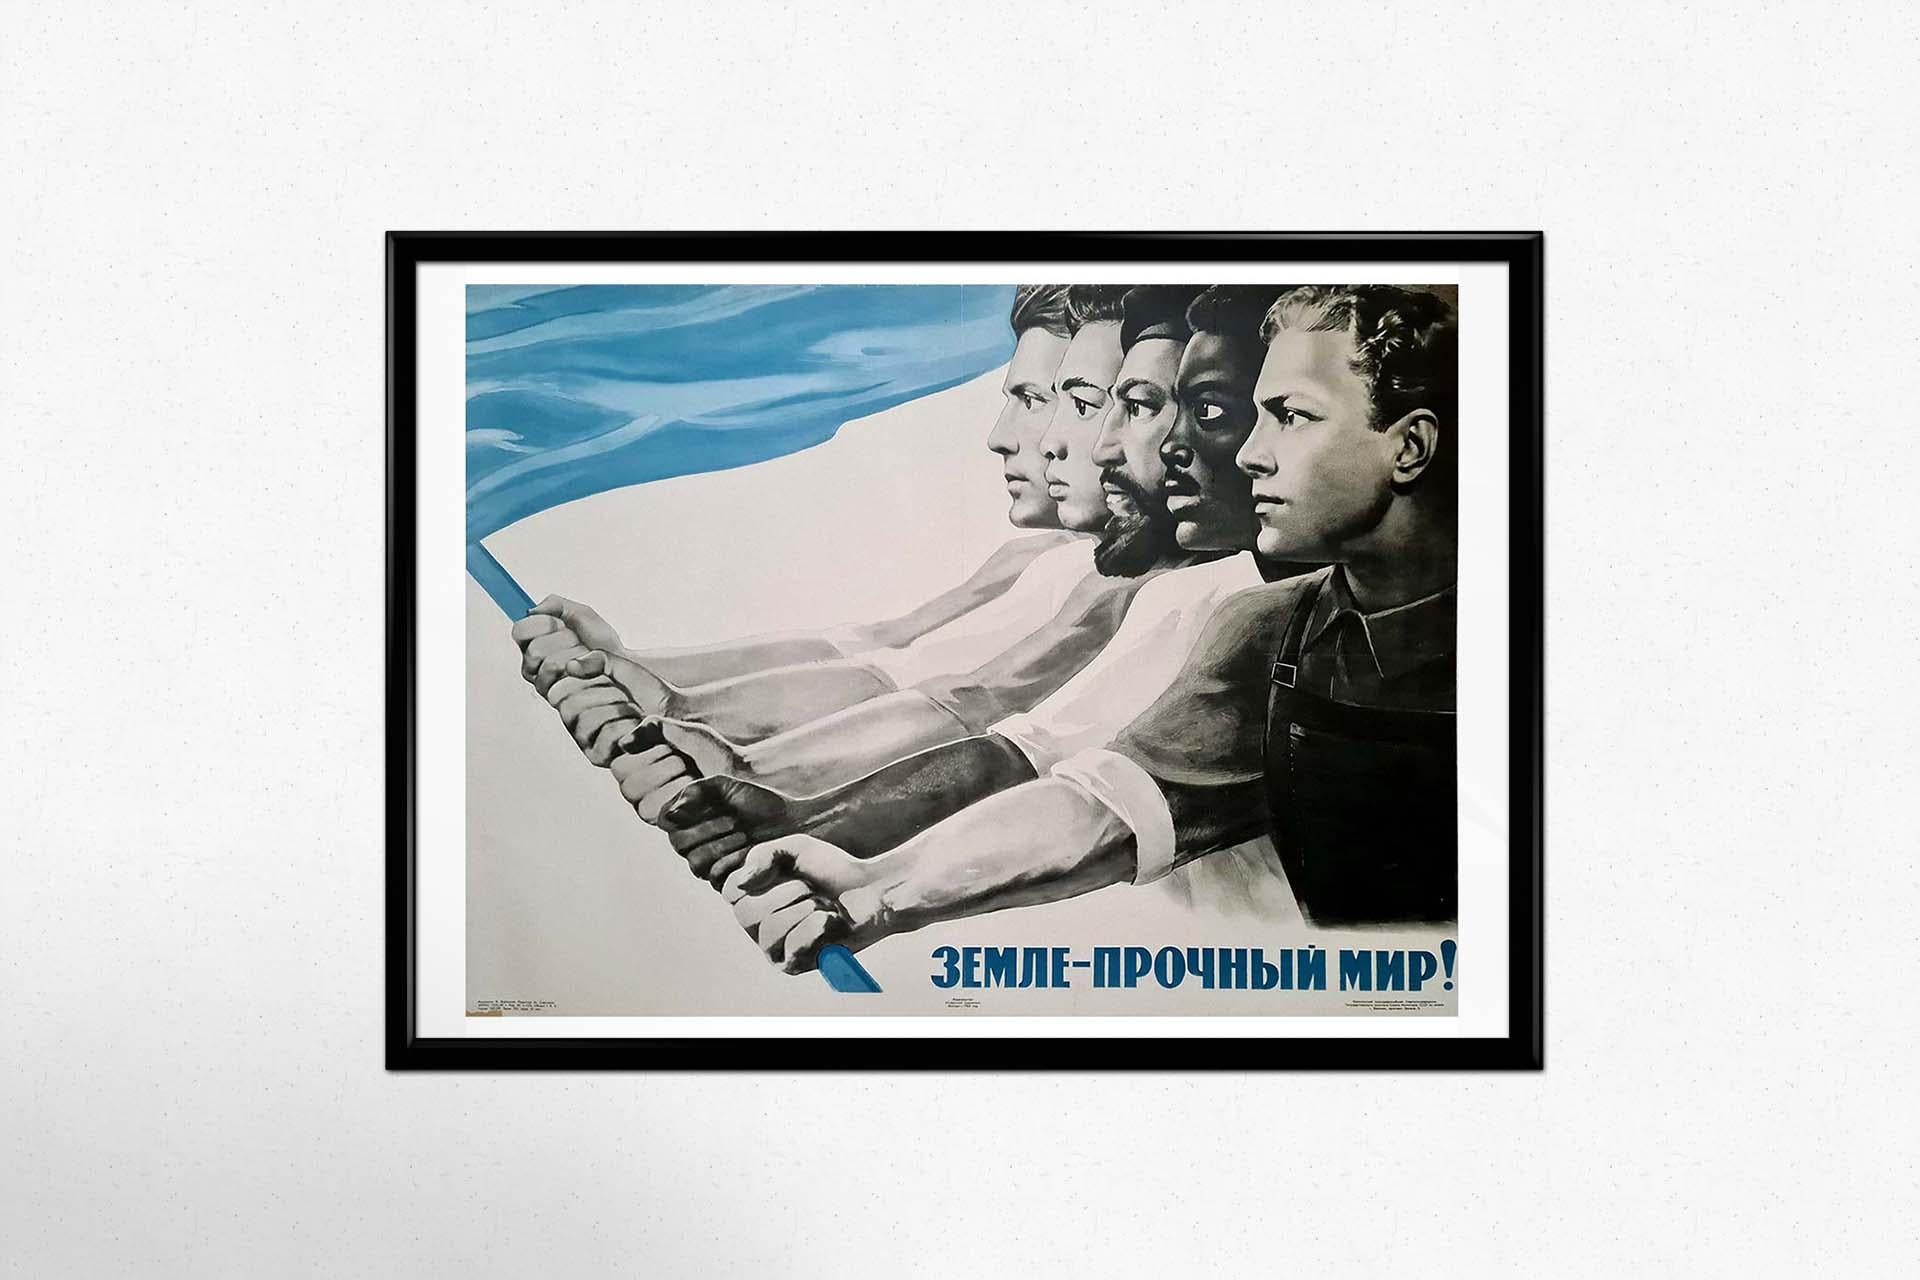 In 1965, Soviet artist Victor Koretzky crafted a compelling propaganda poster titled Russian Youth, encapsulating the ideals and aspirations of the Soviet Union during the height of the Cold War. This piece reflects the Soviet regime's focus on